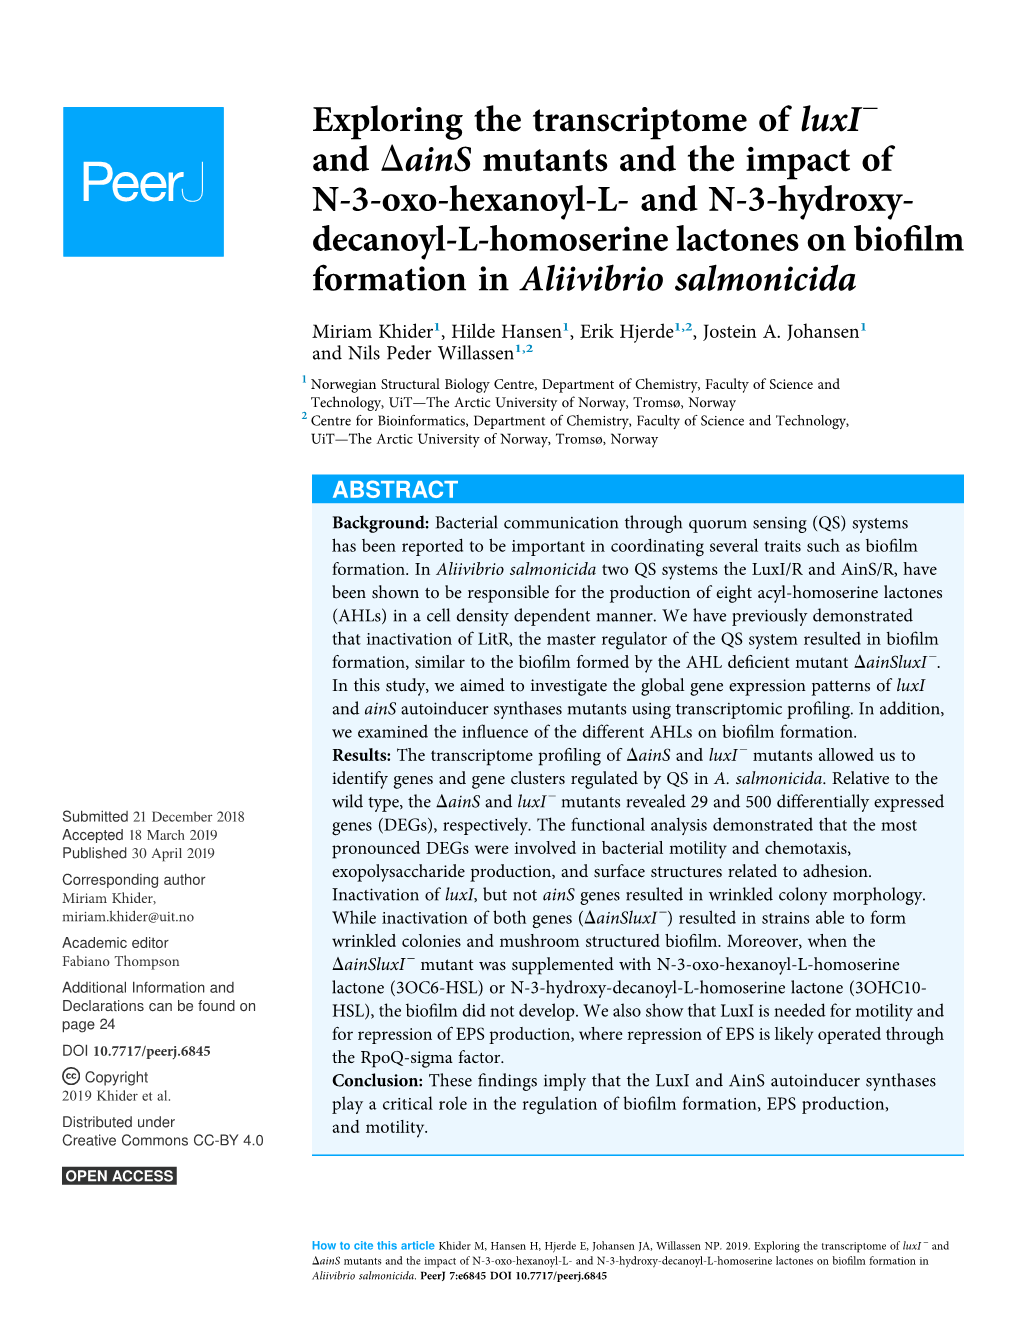 Exploring the Transcriptome of Luxi- and &Dgr;Ains Mutants and the Impact of N-3-Oxo-Hexanoyl-L